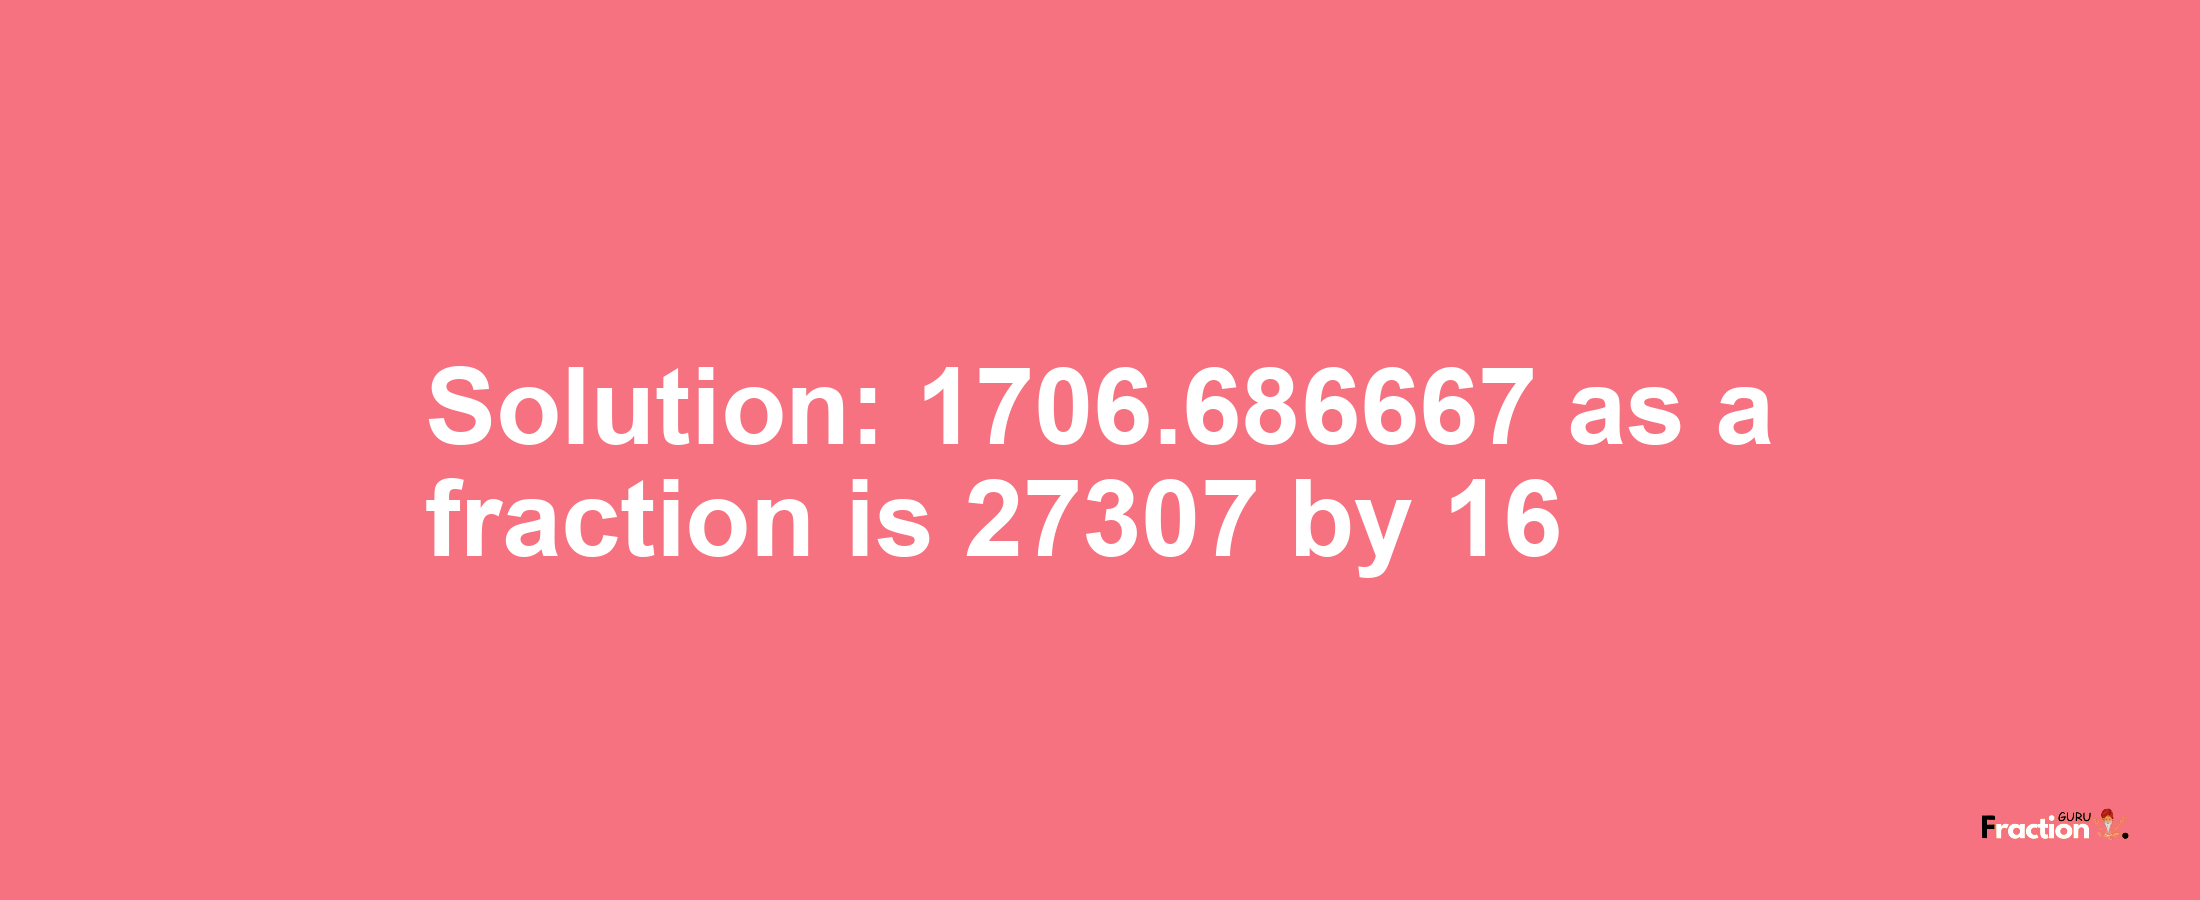 Solution:1706.686667 as a fraction is 27307/16